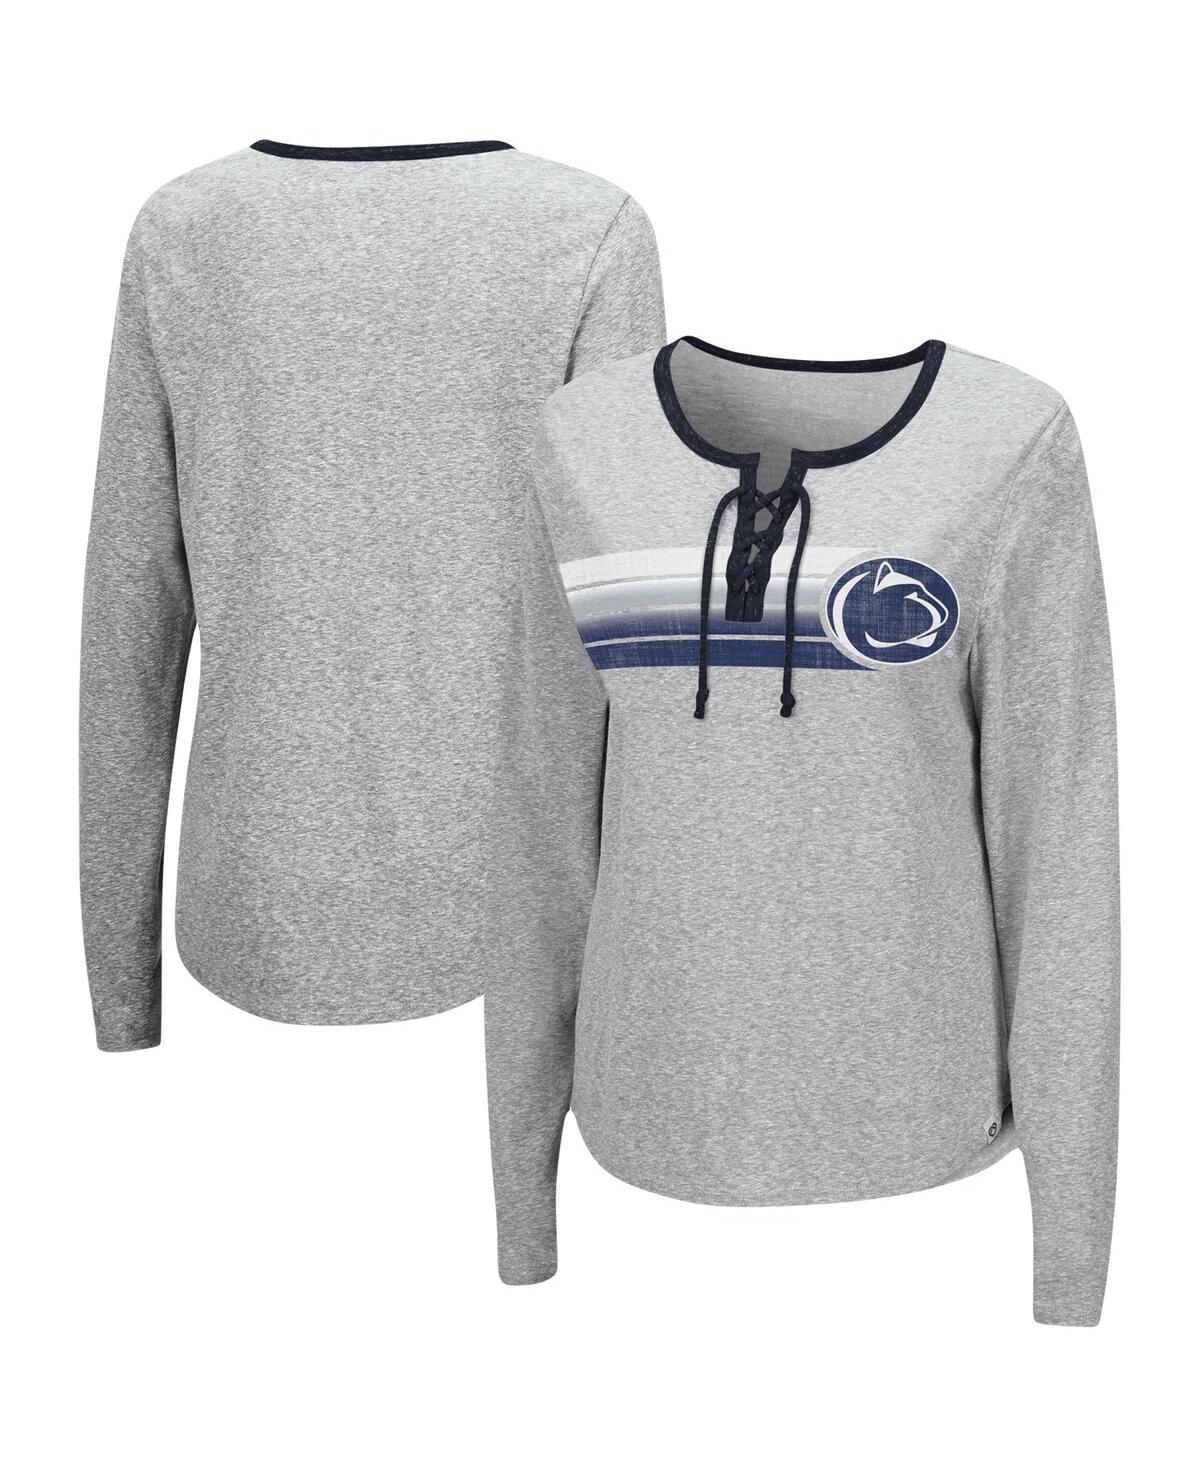 Women's Colosseum Heathered Gray Penn State Nittany Lions Sundial Tri-Blend Long Sleeve Lace-Up T-shirt - Heathered Gray